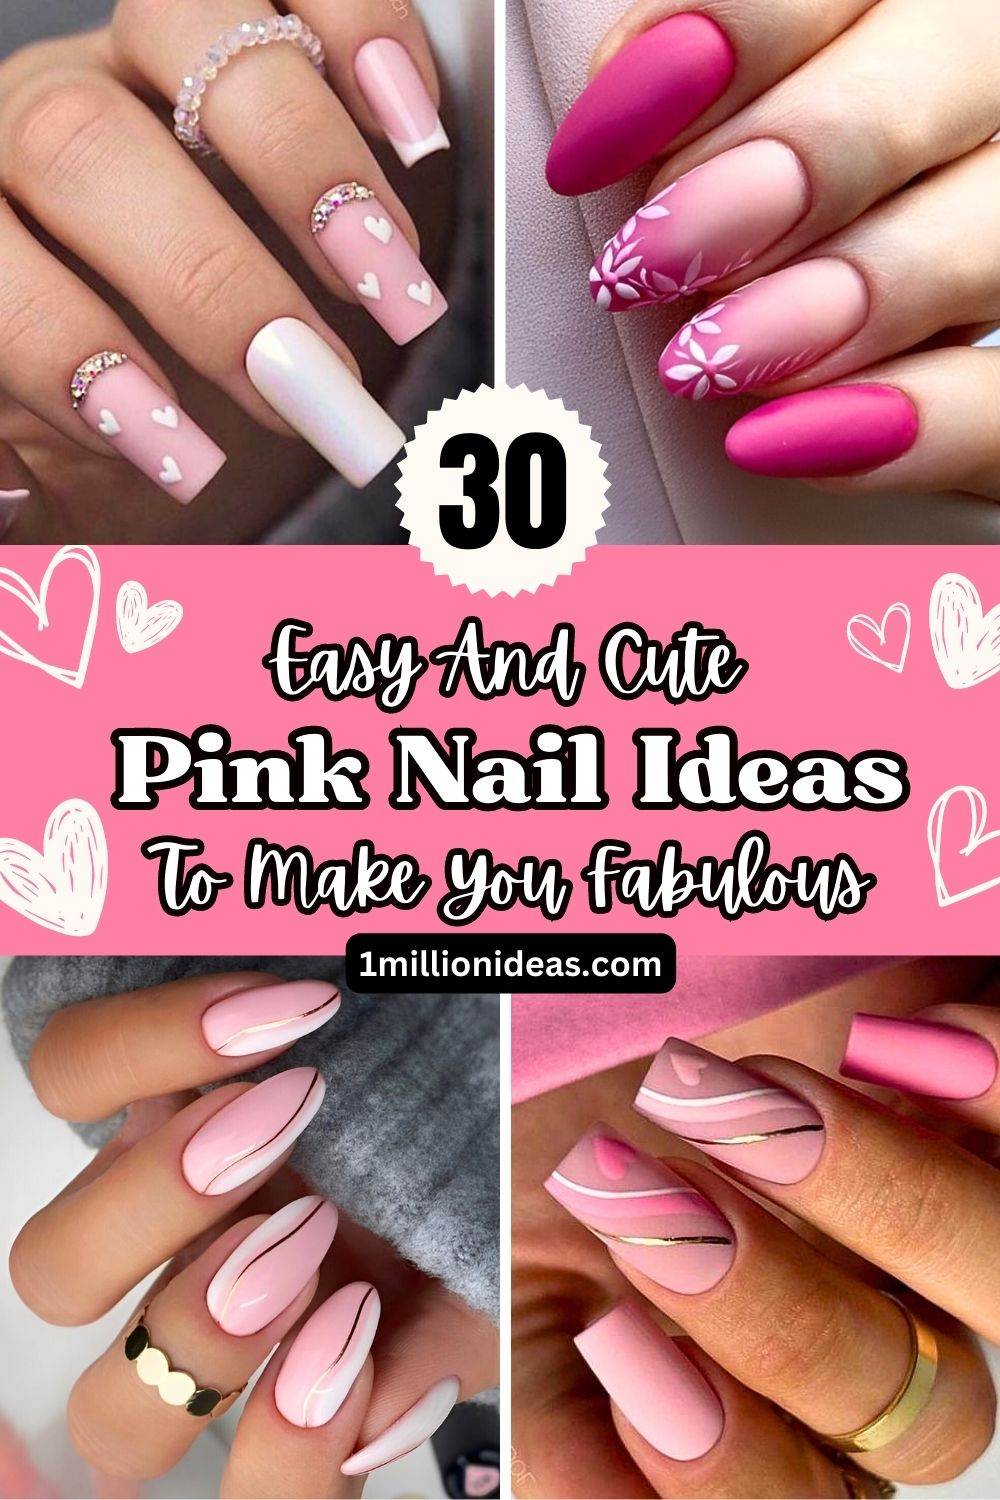 30 Easy And Cute Pink Nail Ideas To Make You Fabulous